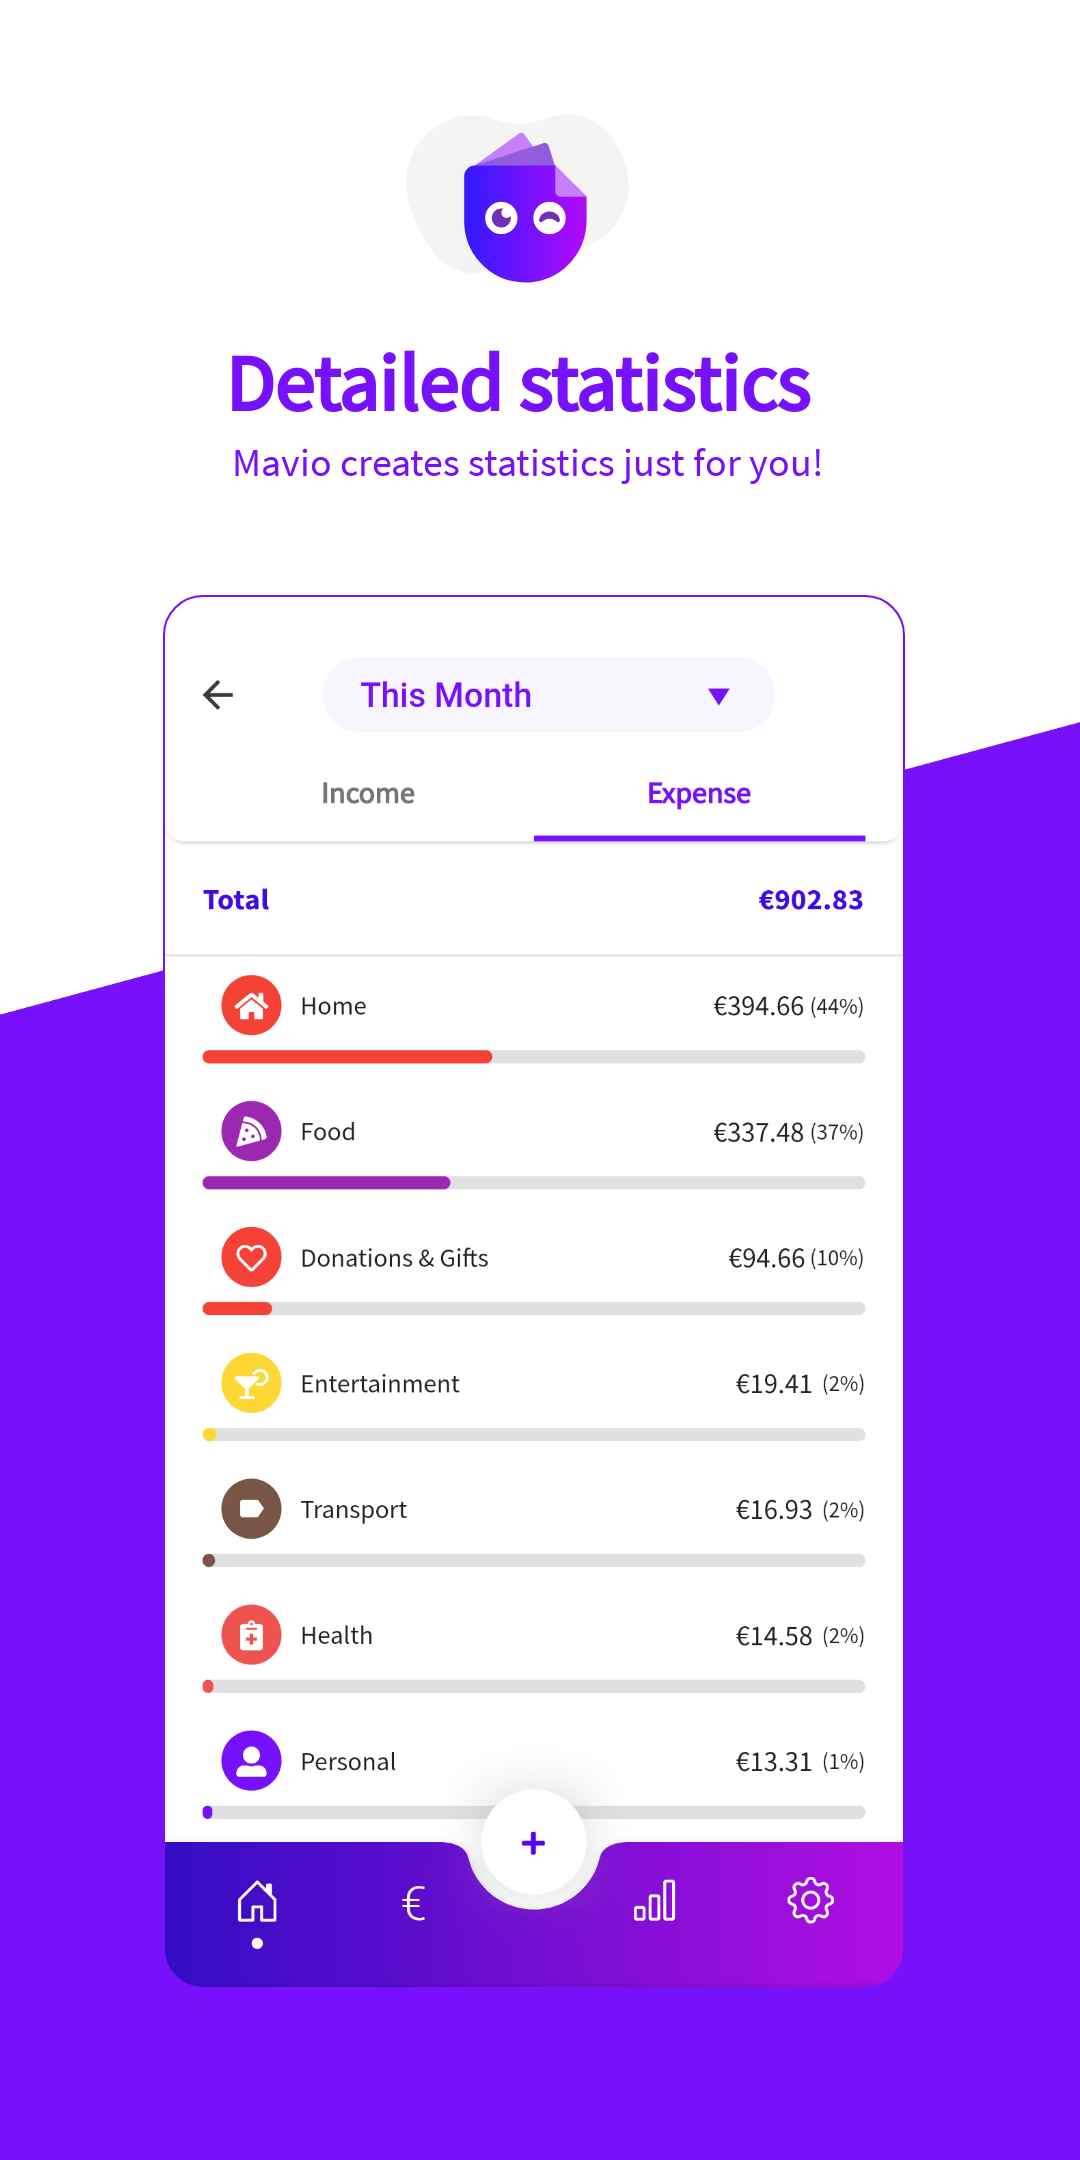 An image of the phone application after adding some purple triangle background behind it. There is also now a title and a description on top. The application screen displays a list of categories along with the money spent that month on it.